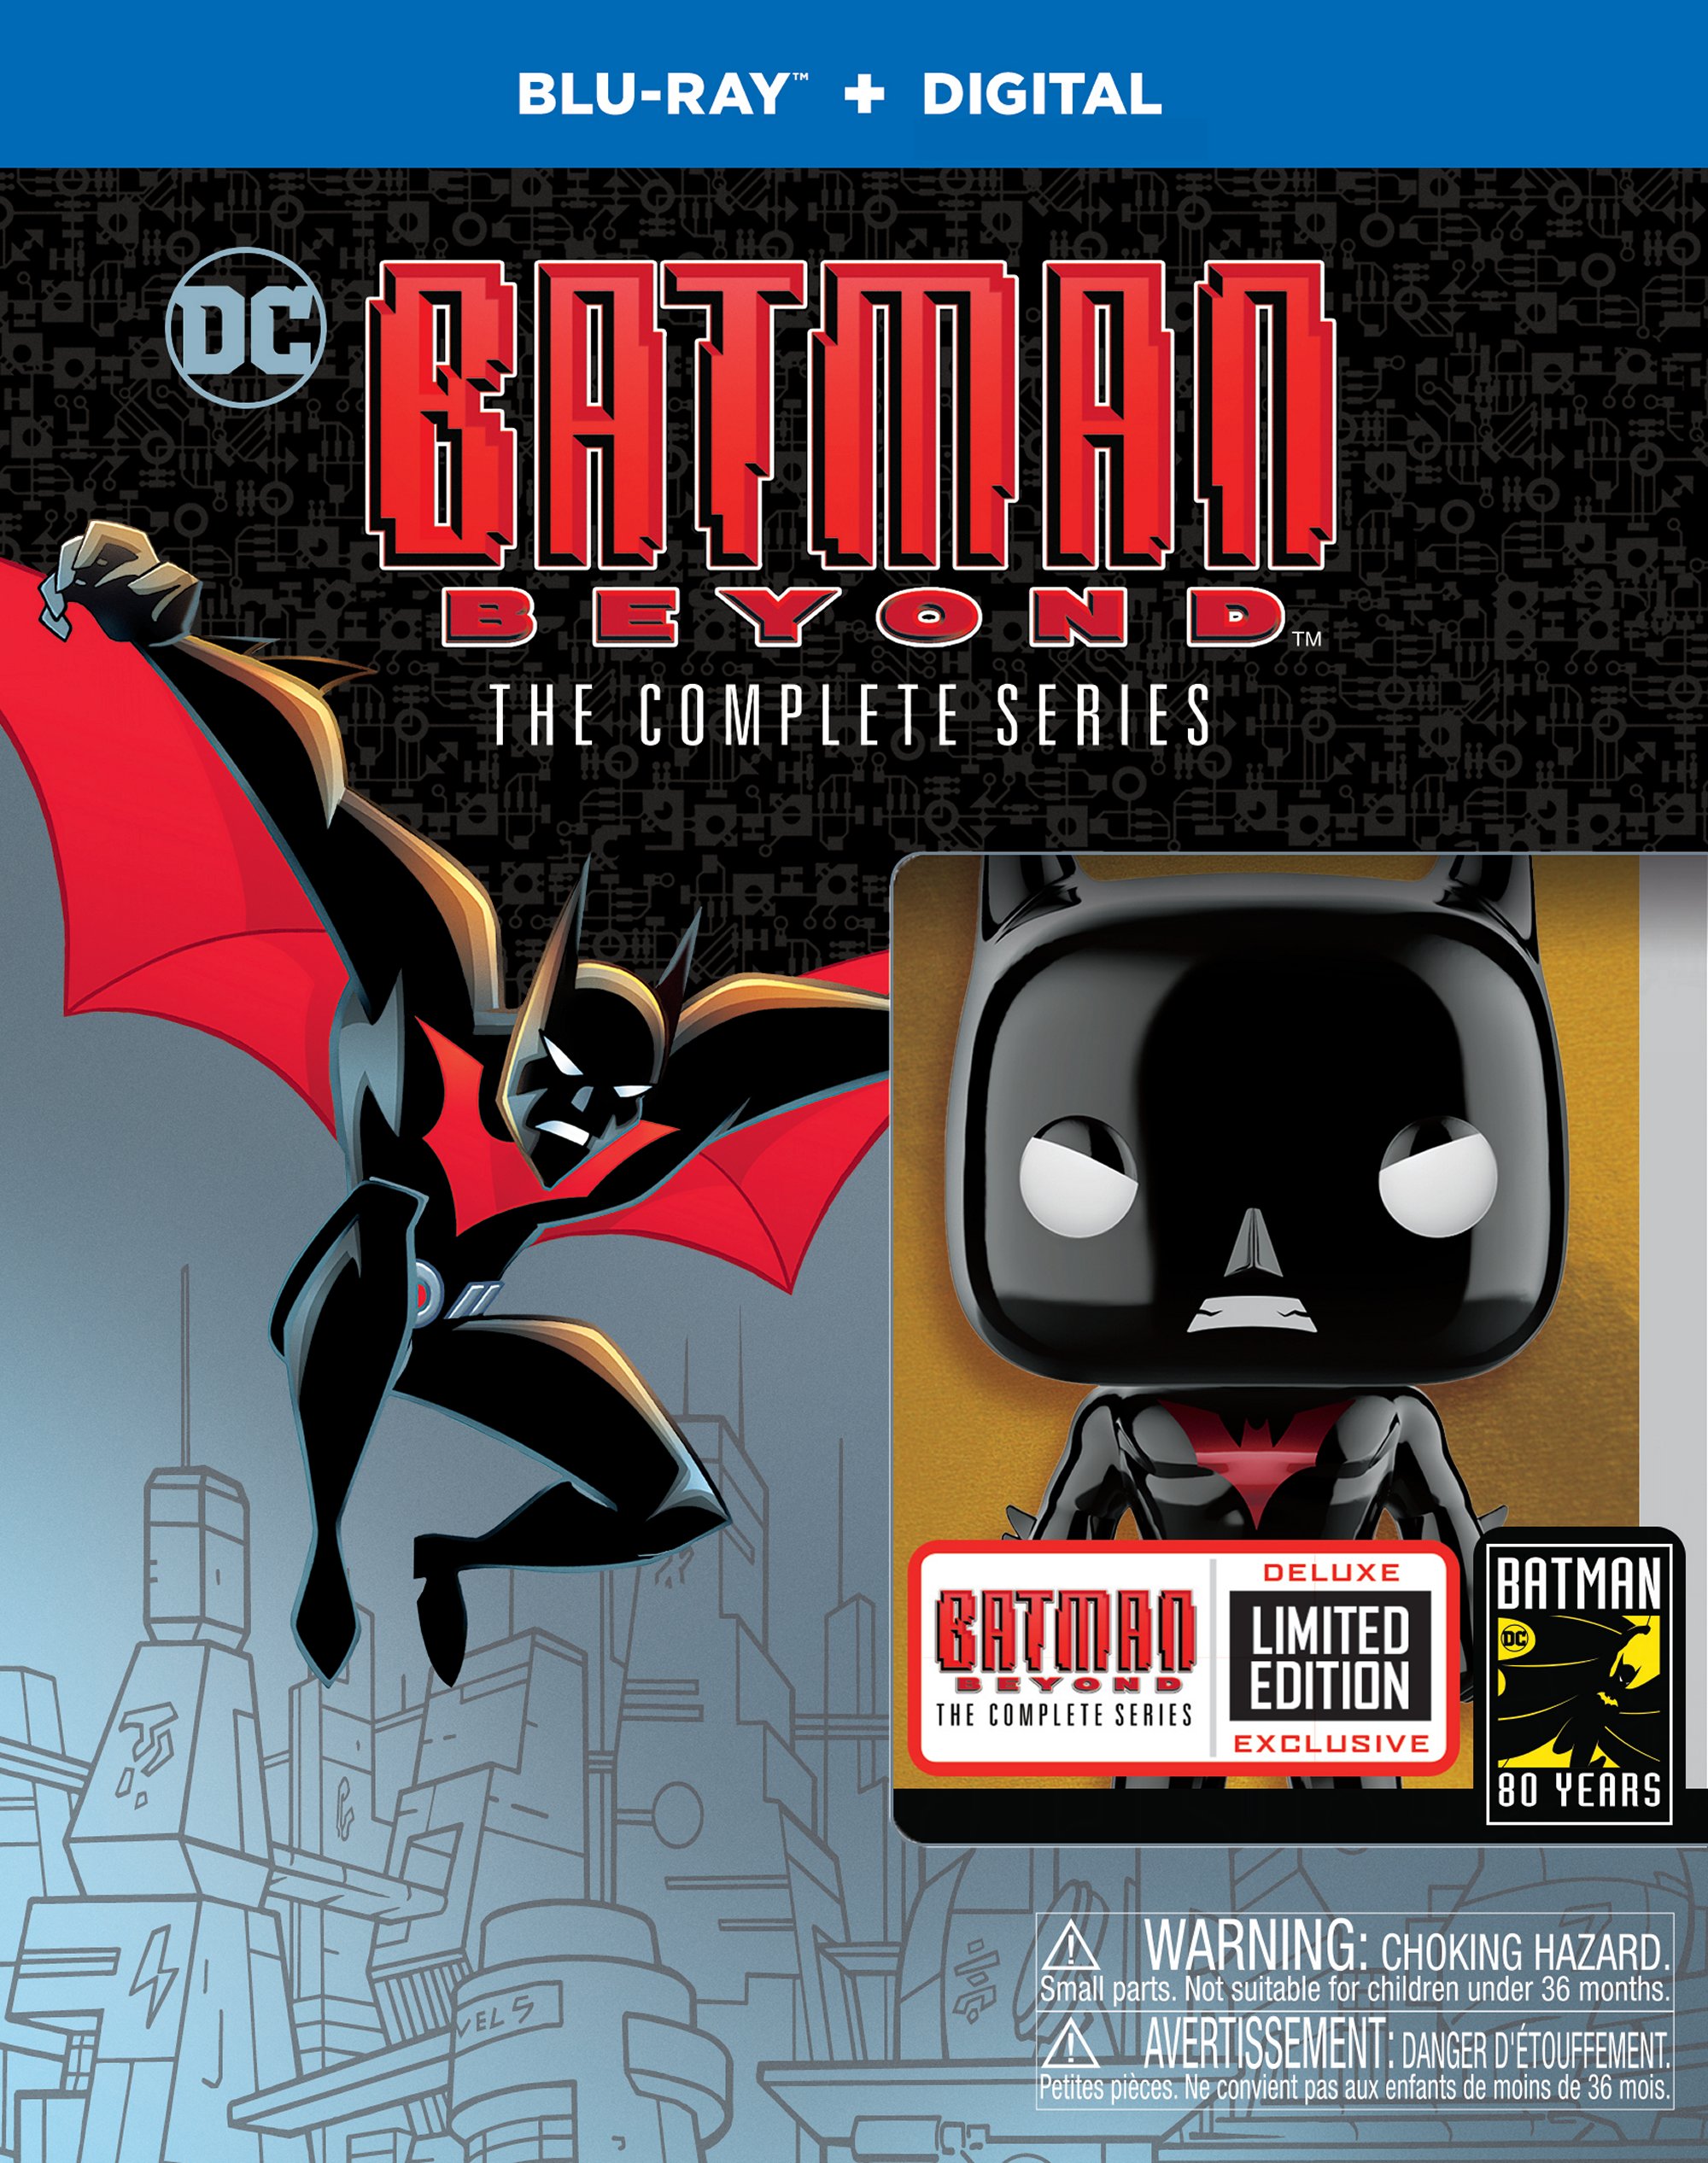 From SDCC Hall H and Beyond! Batman Beyond: The Complete Series – LTD Remastered Blu-ray Box set Drops in October